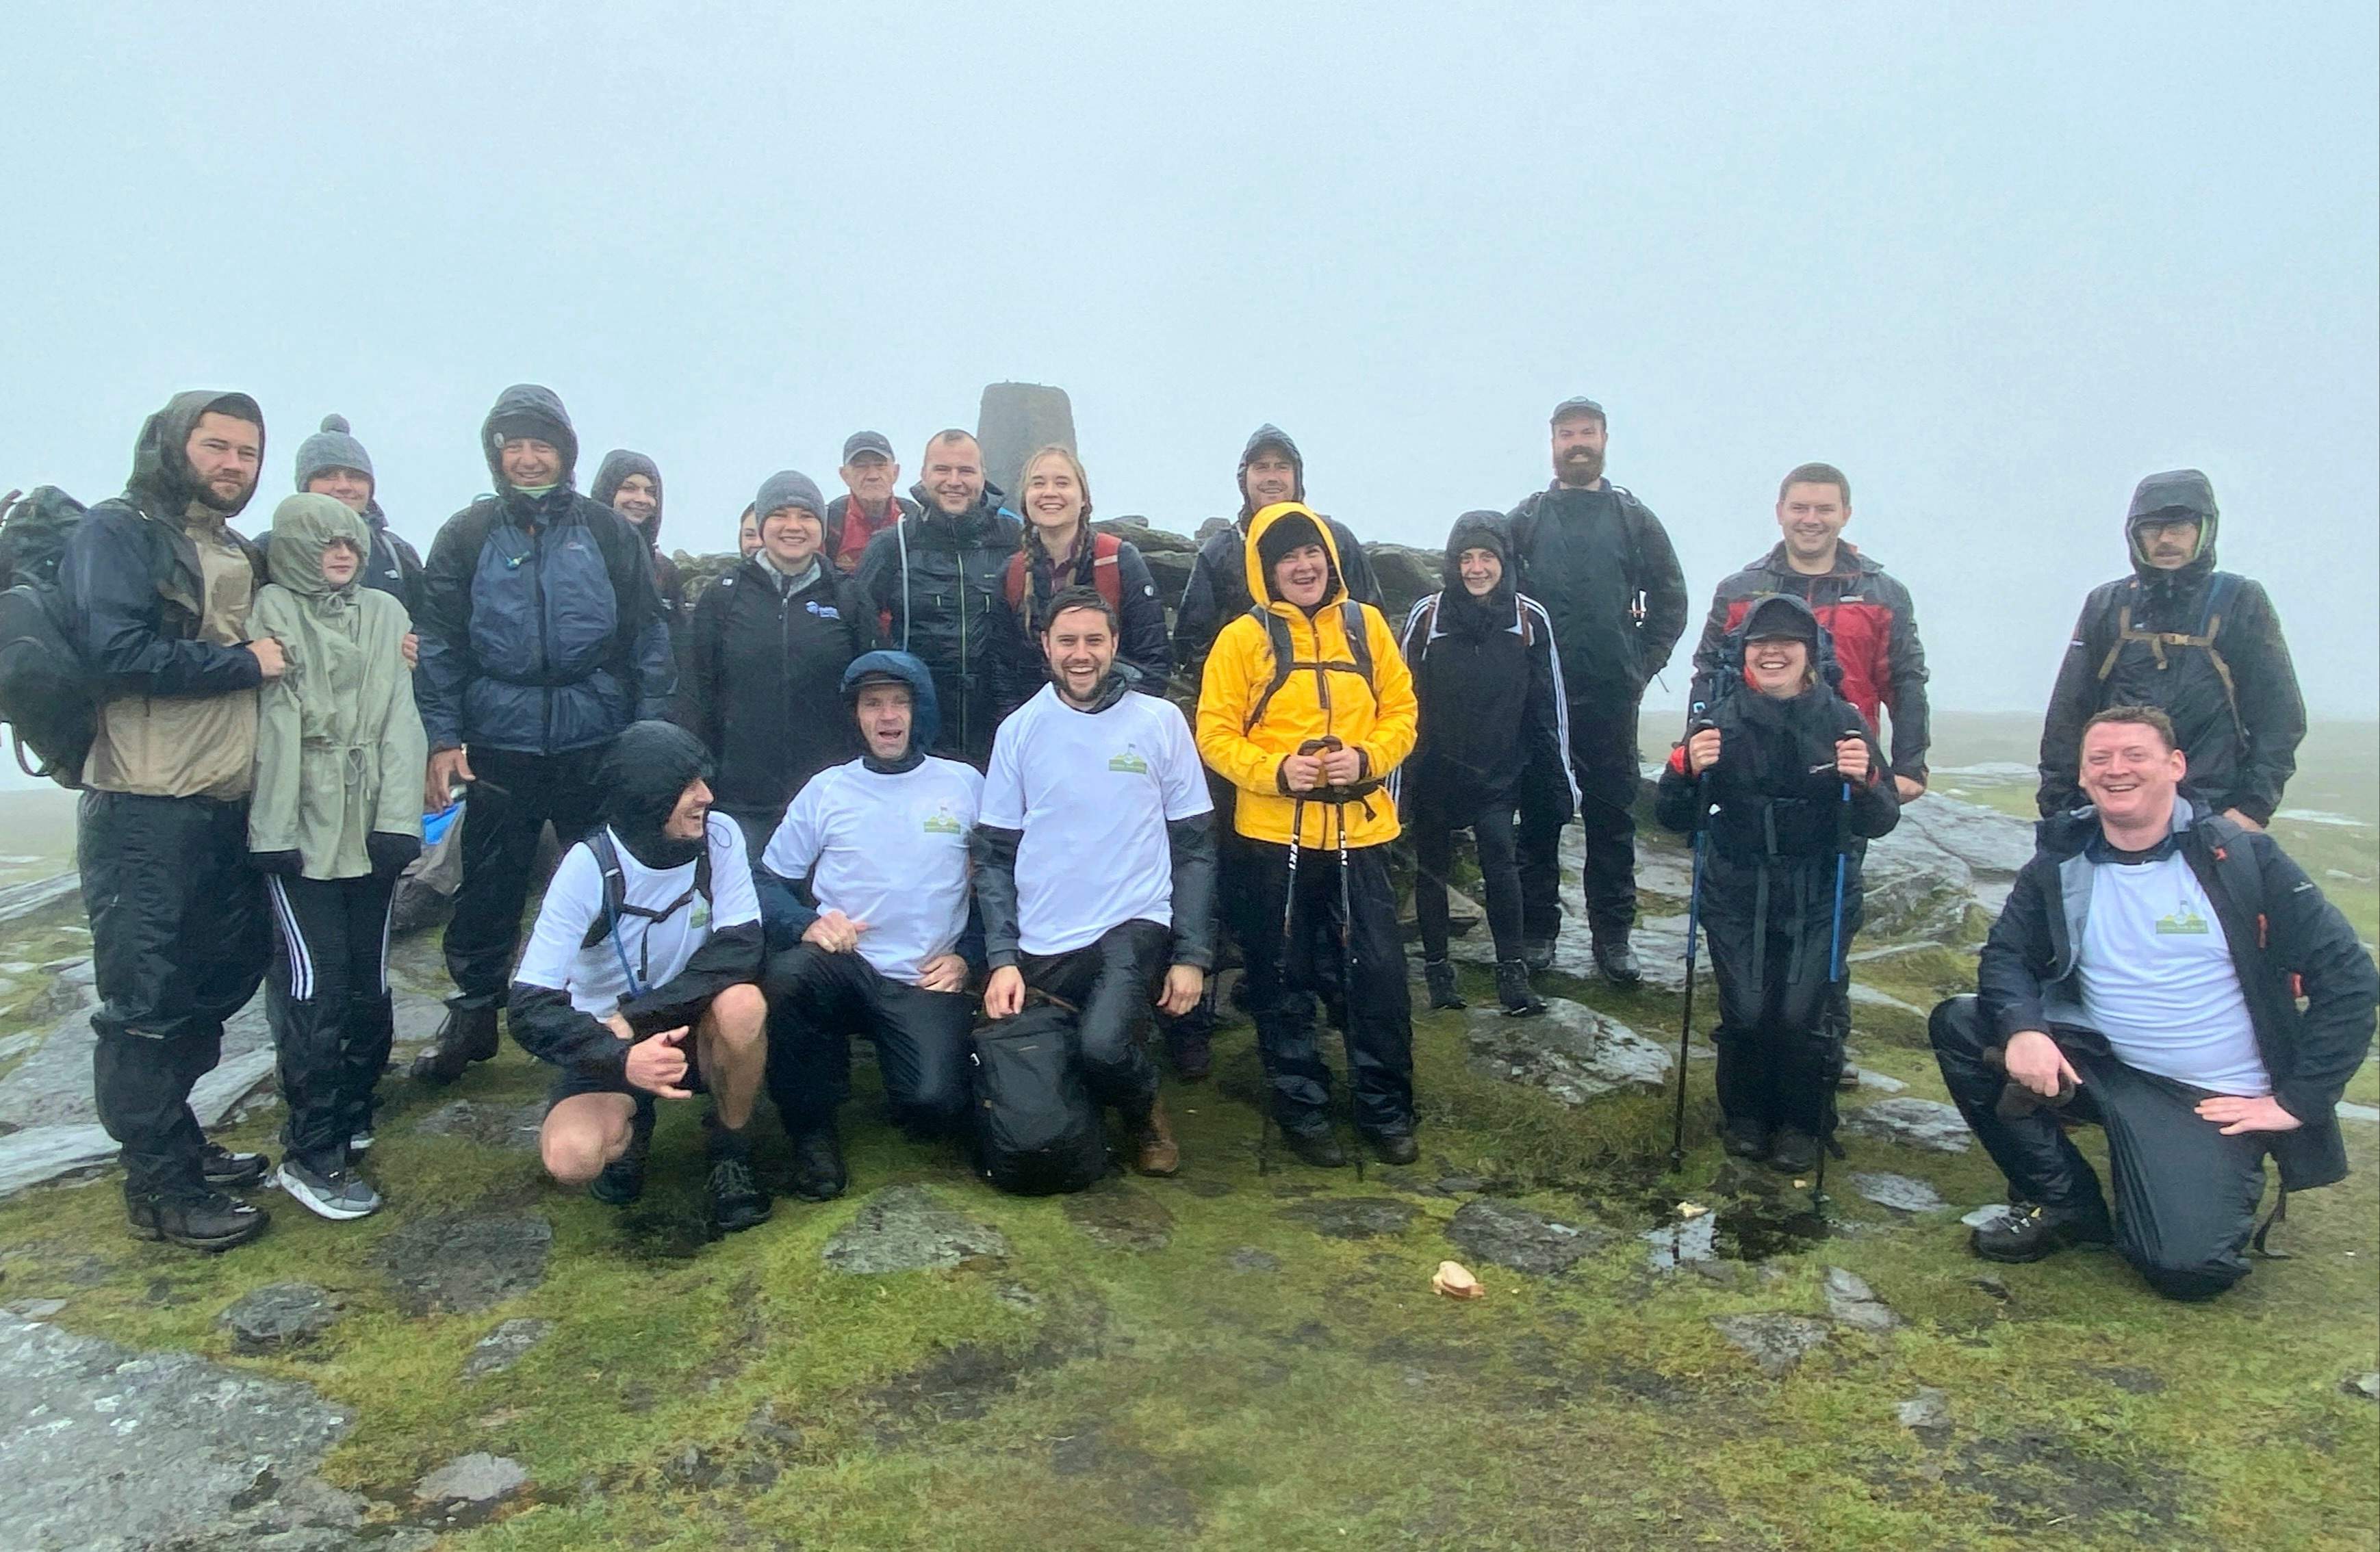 Our wet warriors reach the peak of Lugnaquilla